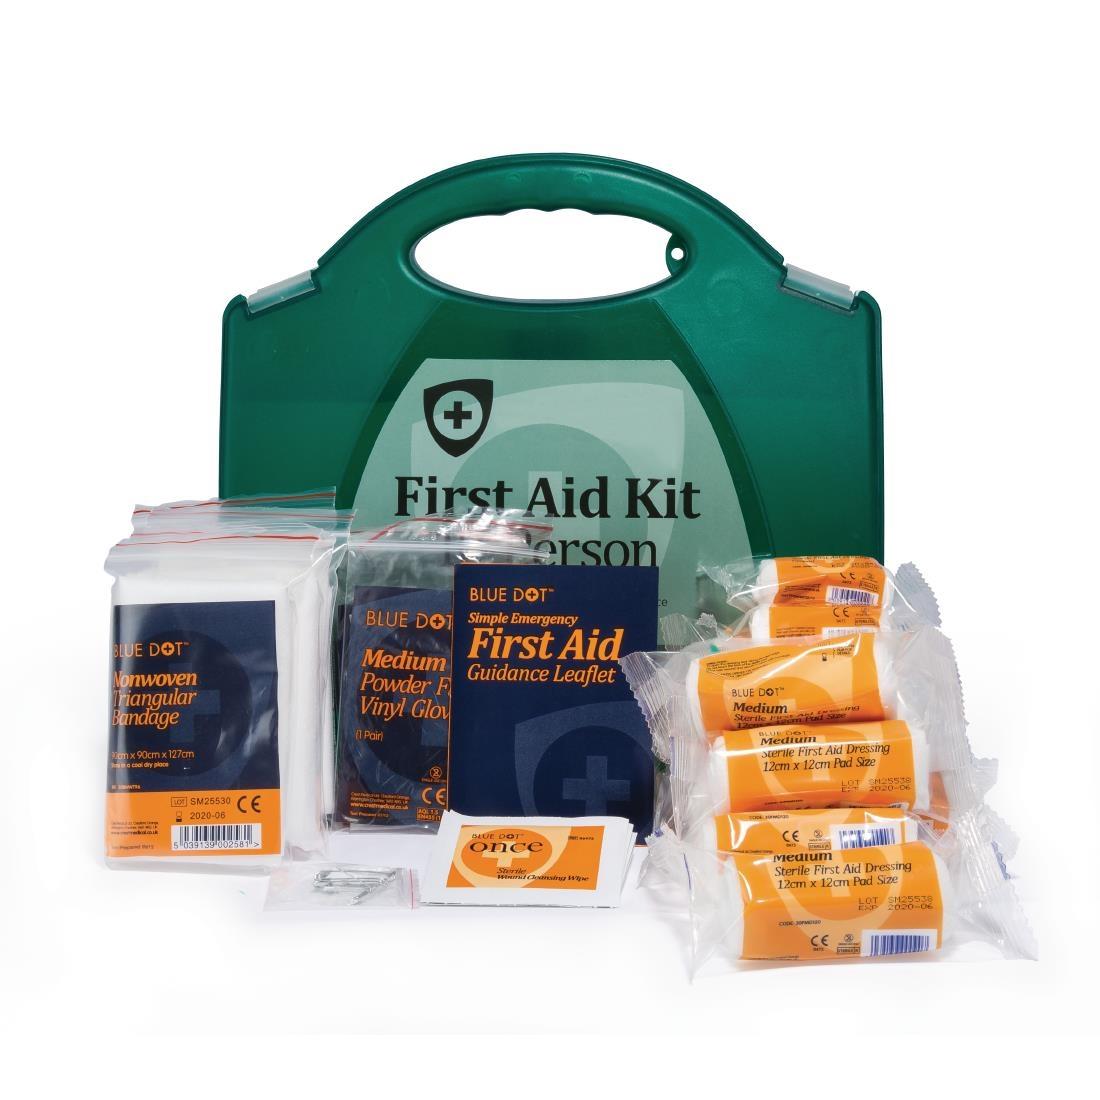 Vogue HSE First Aid Kit 10 person - GK091  - 3